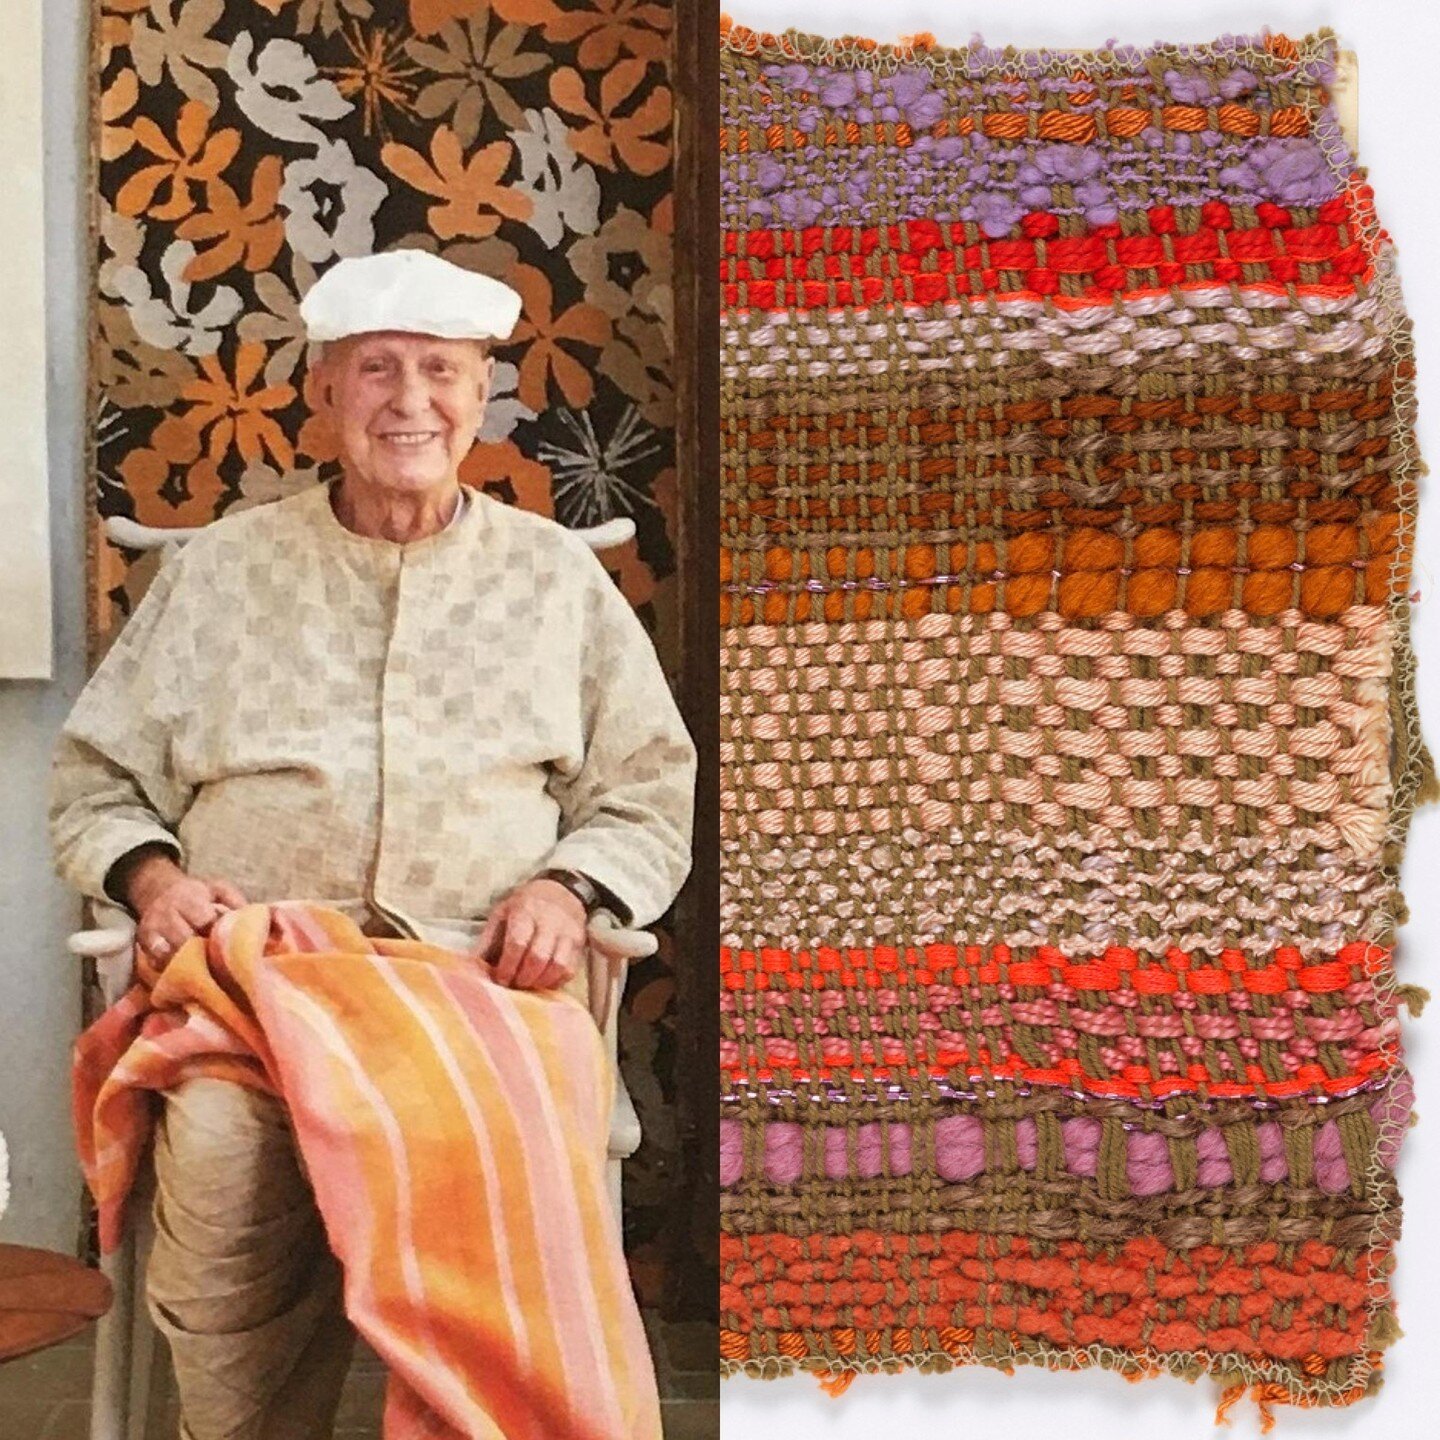 Happy Birthday to powerhouse textile designer Jack Lenor Larsen! Born in Seattle, Larsen studied architecture and furniture design before discovering his affinity for weaving. He earned his MFA from @cranbrook_art in the early 1950&rsquo;s and opened